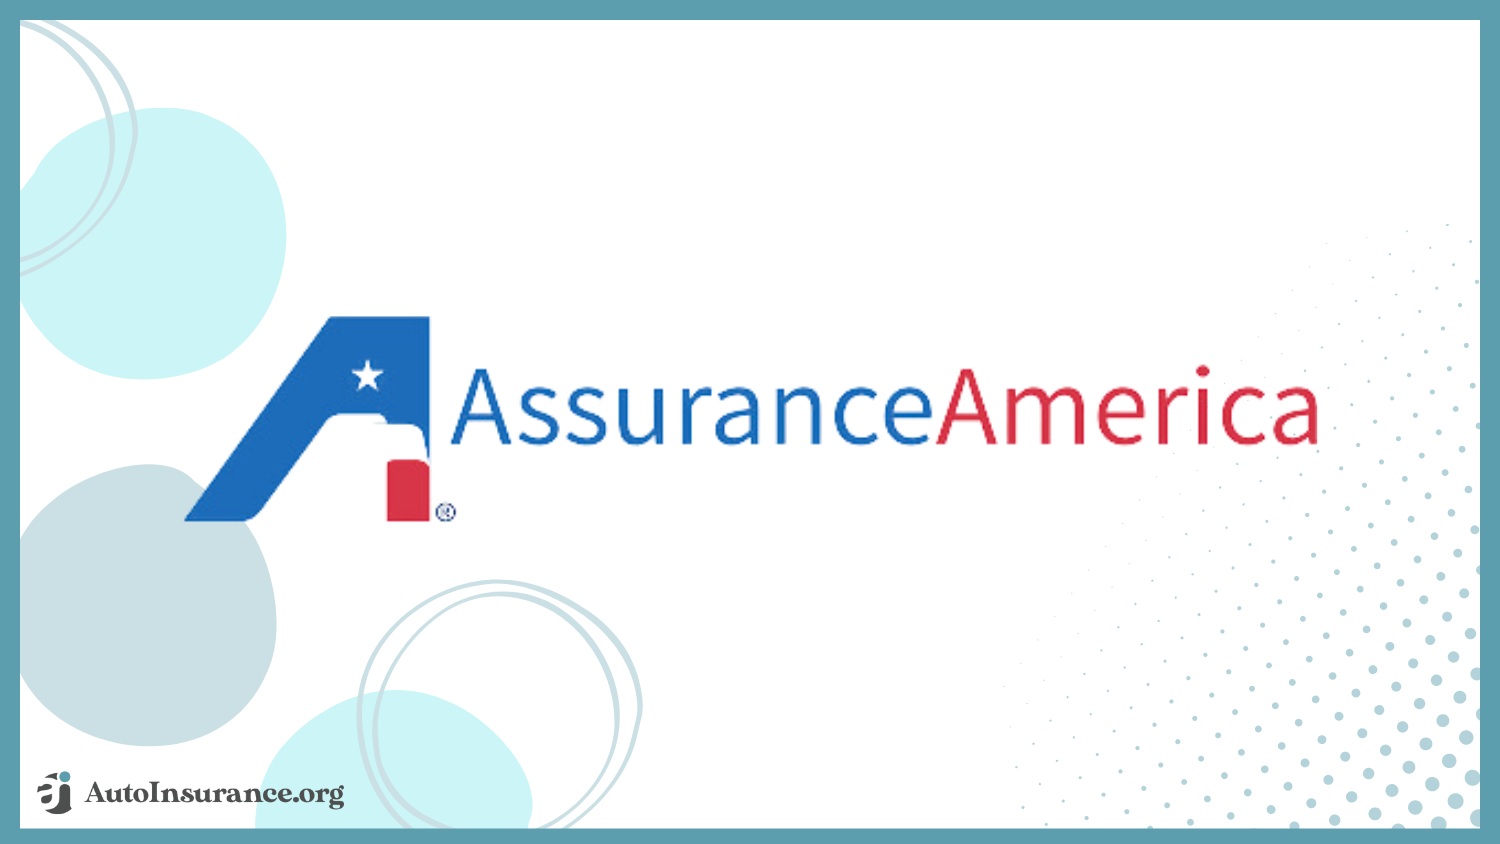 AssuranceAmerica: Best Pay-As-You-Go Auto Insurance in Arizona